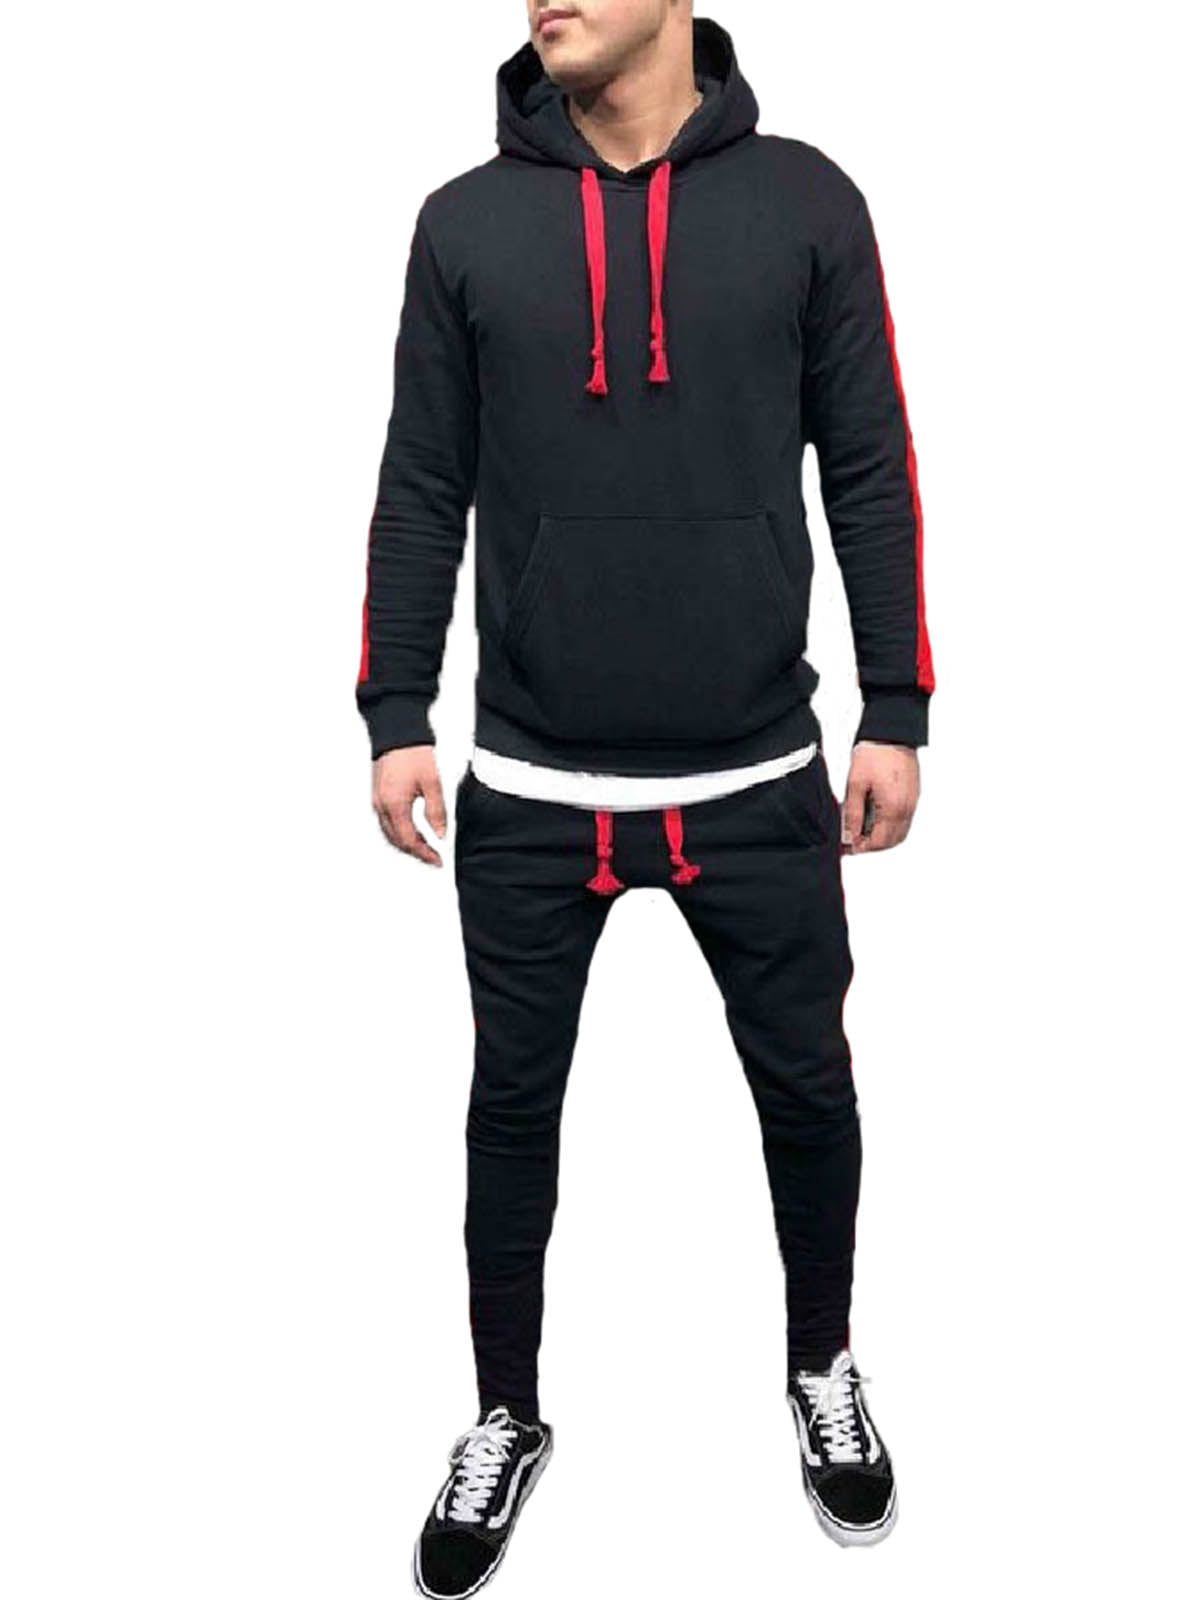 New Kids Contrast Cord Hooded Tracksuit Set Zip Top Gym Jogging Bottom 